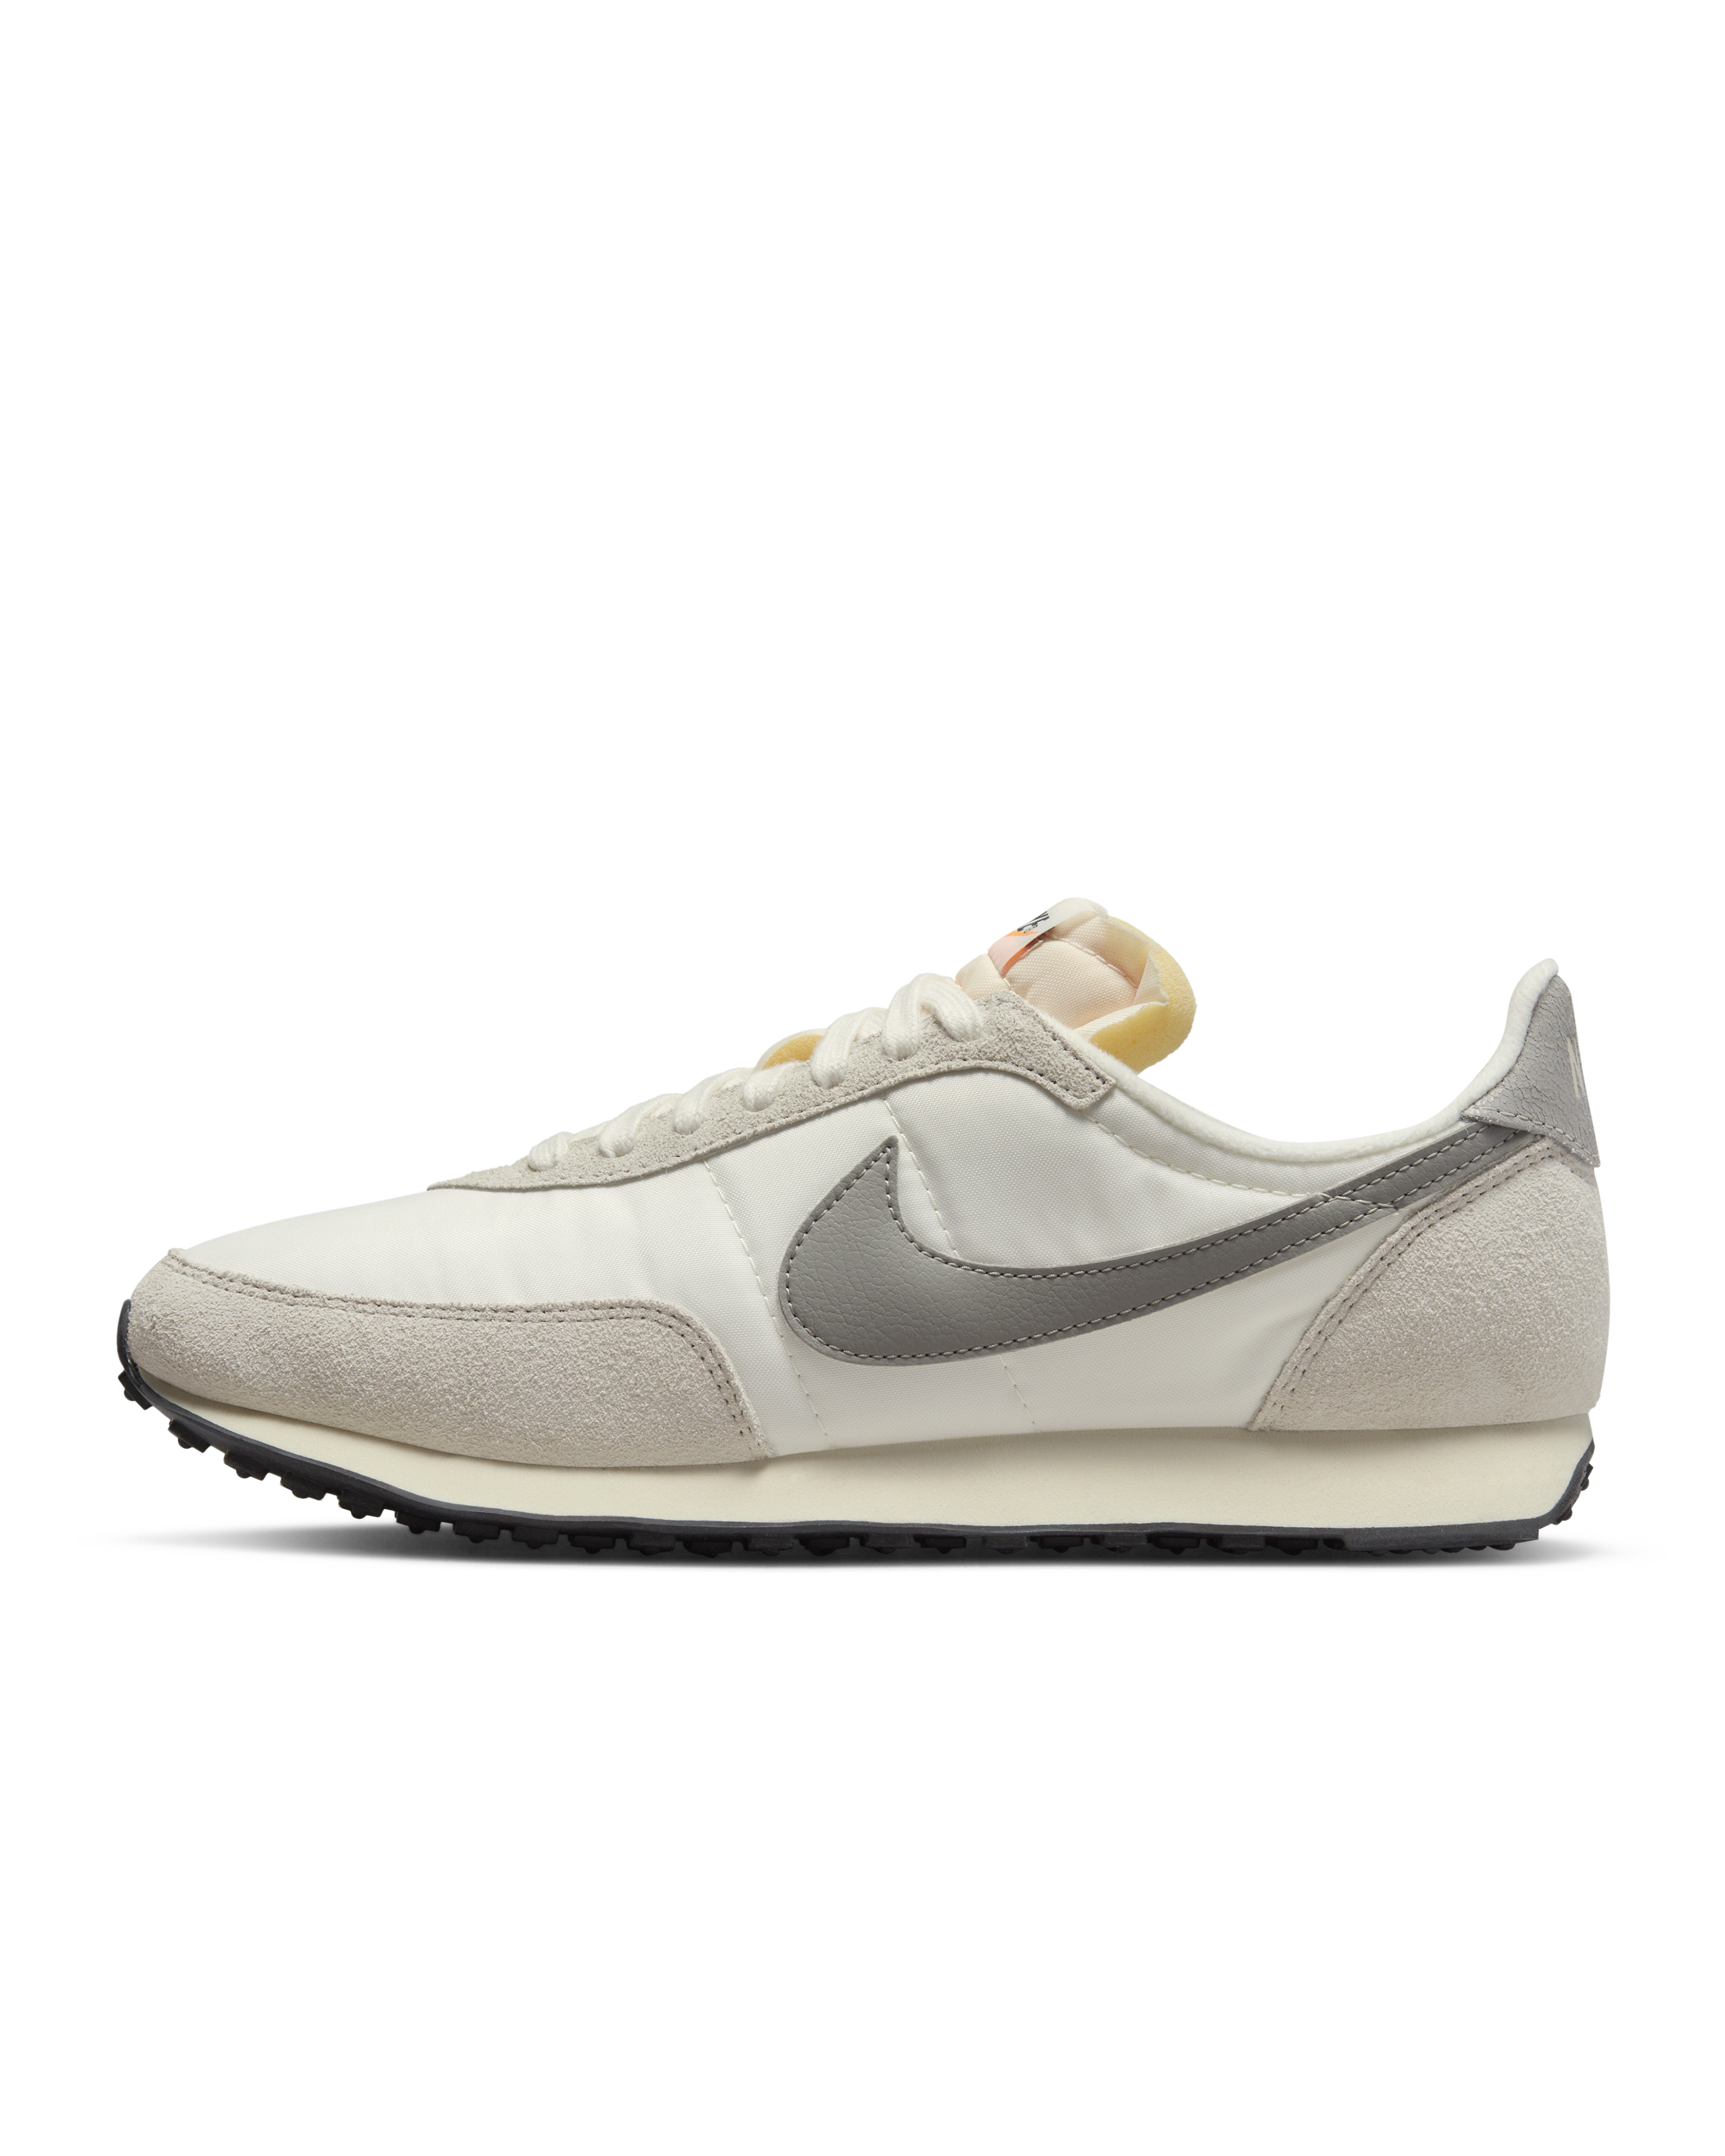 Nike mens nike waffle trainer 2 Iconic Waffle Trainers Are on Sale for 59% Off Right Now